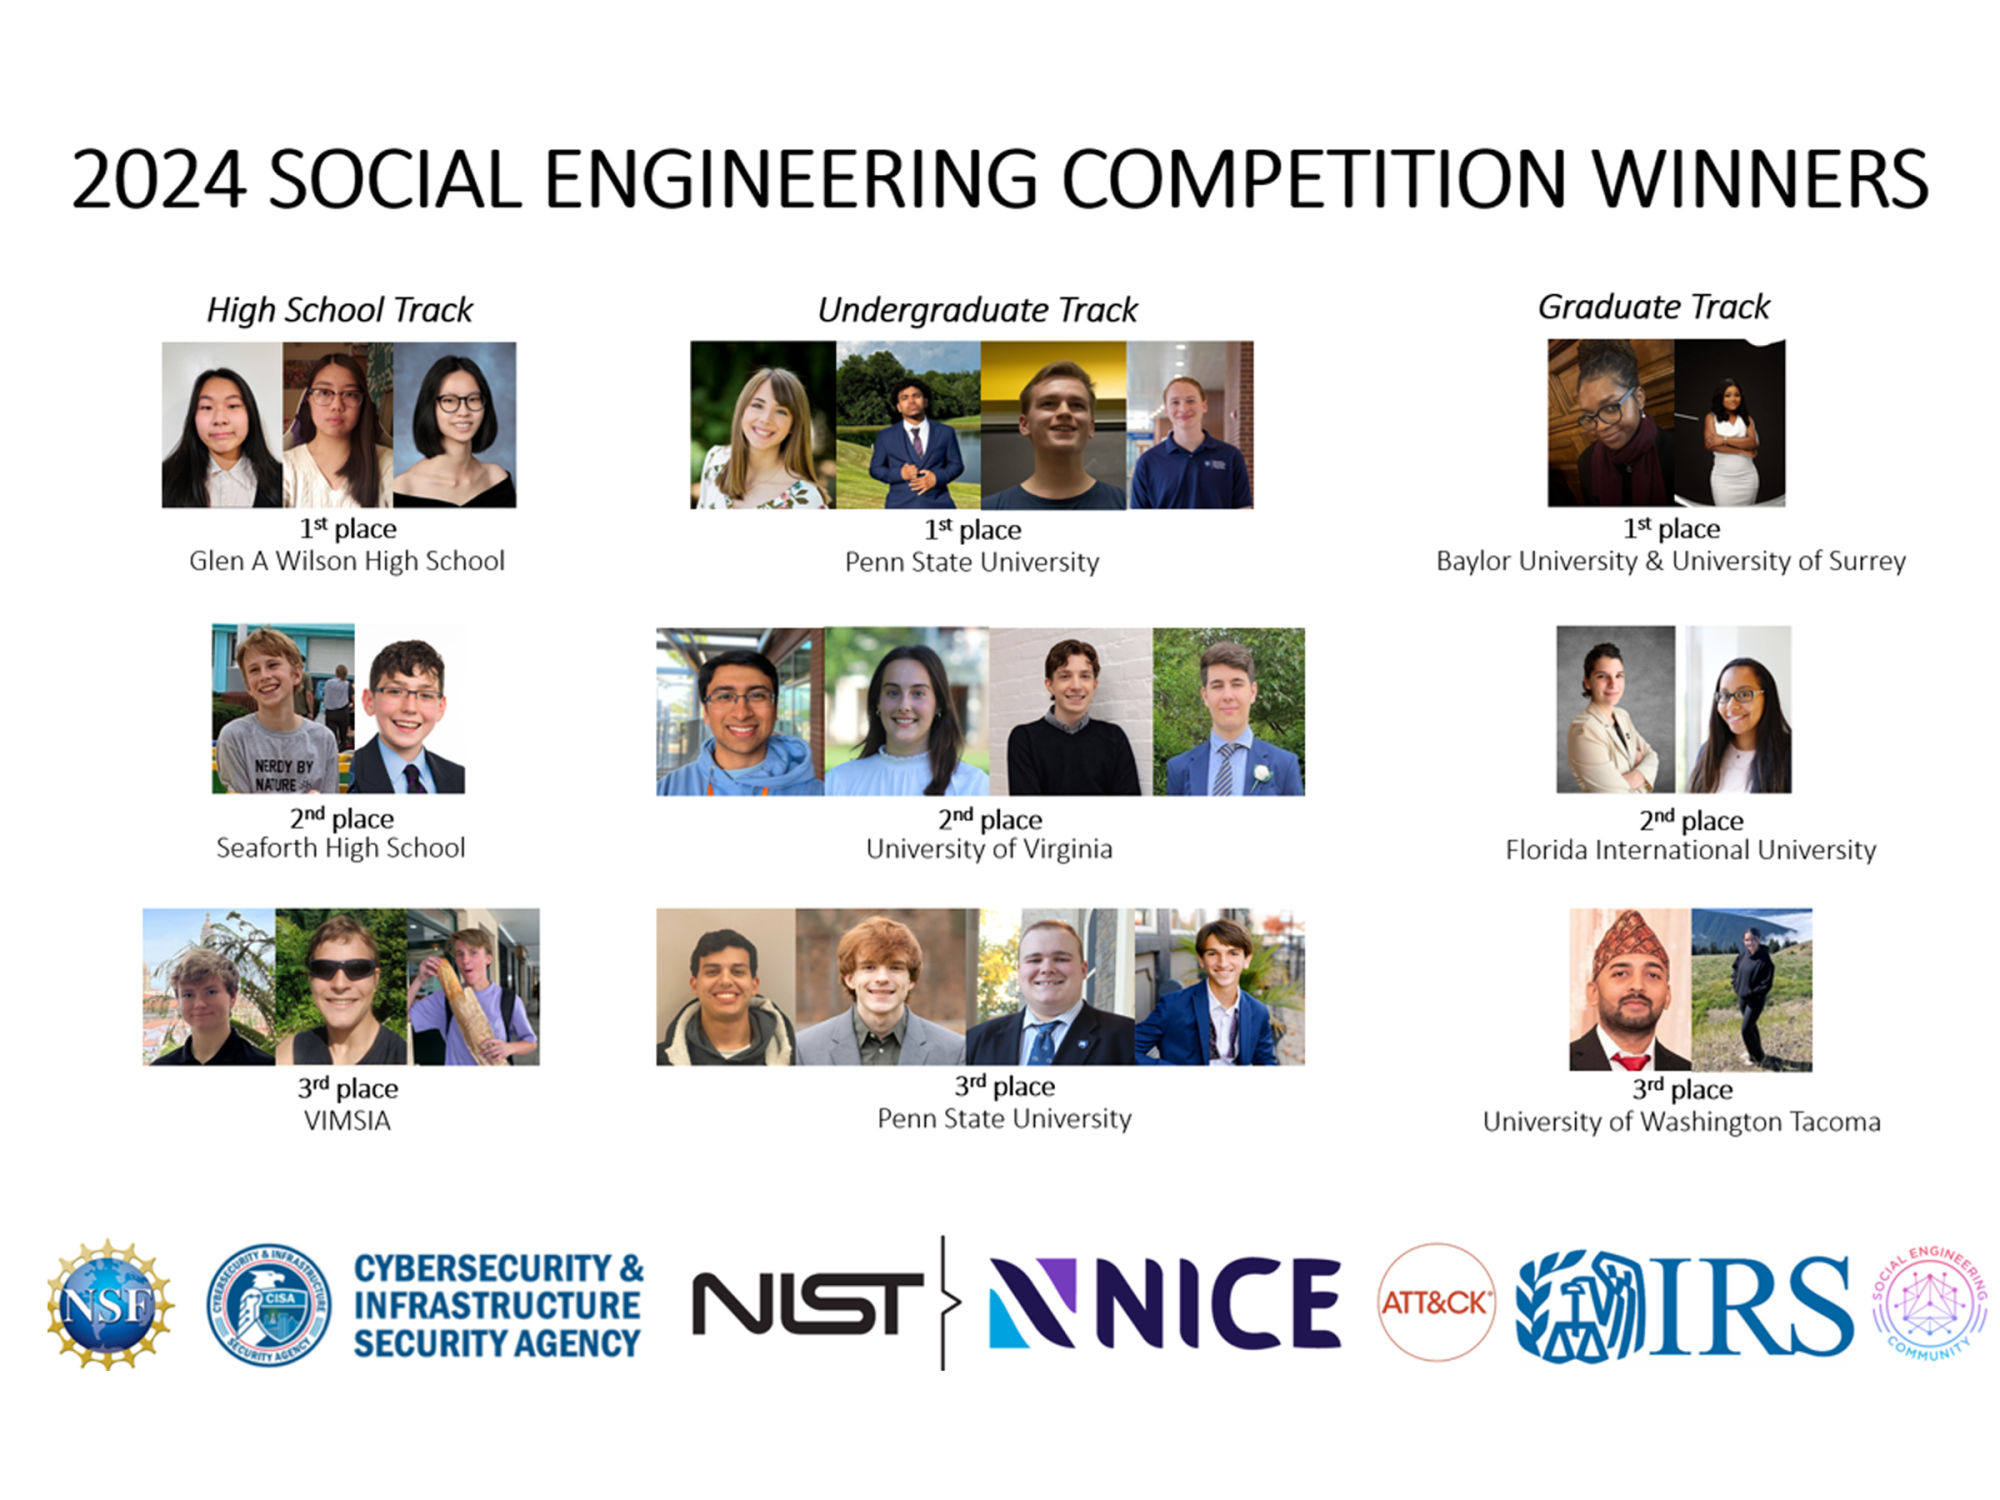 IST students win top spots at social engineering competition